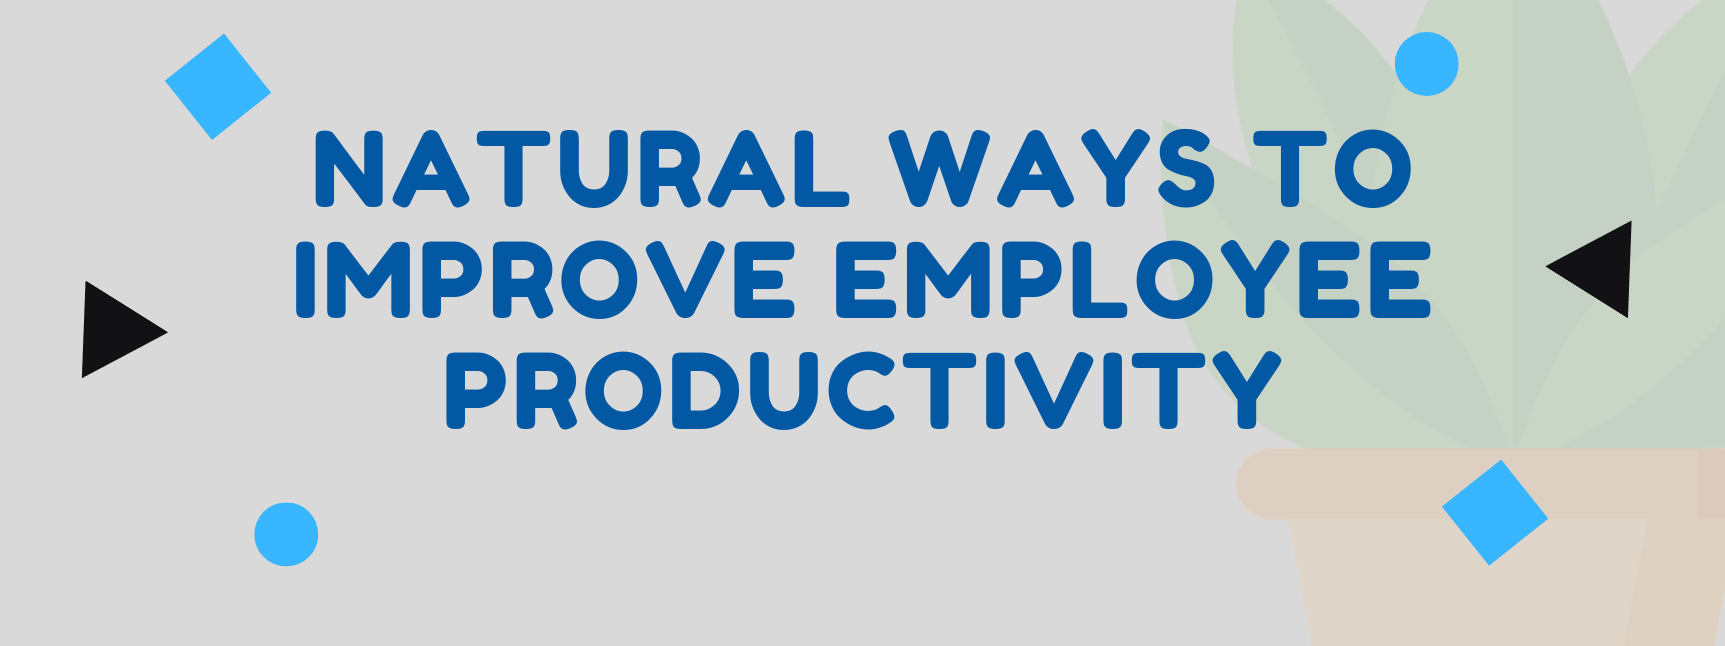 Natural Ways to Improve Employee Productivity (Infographic)